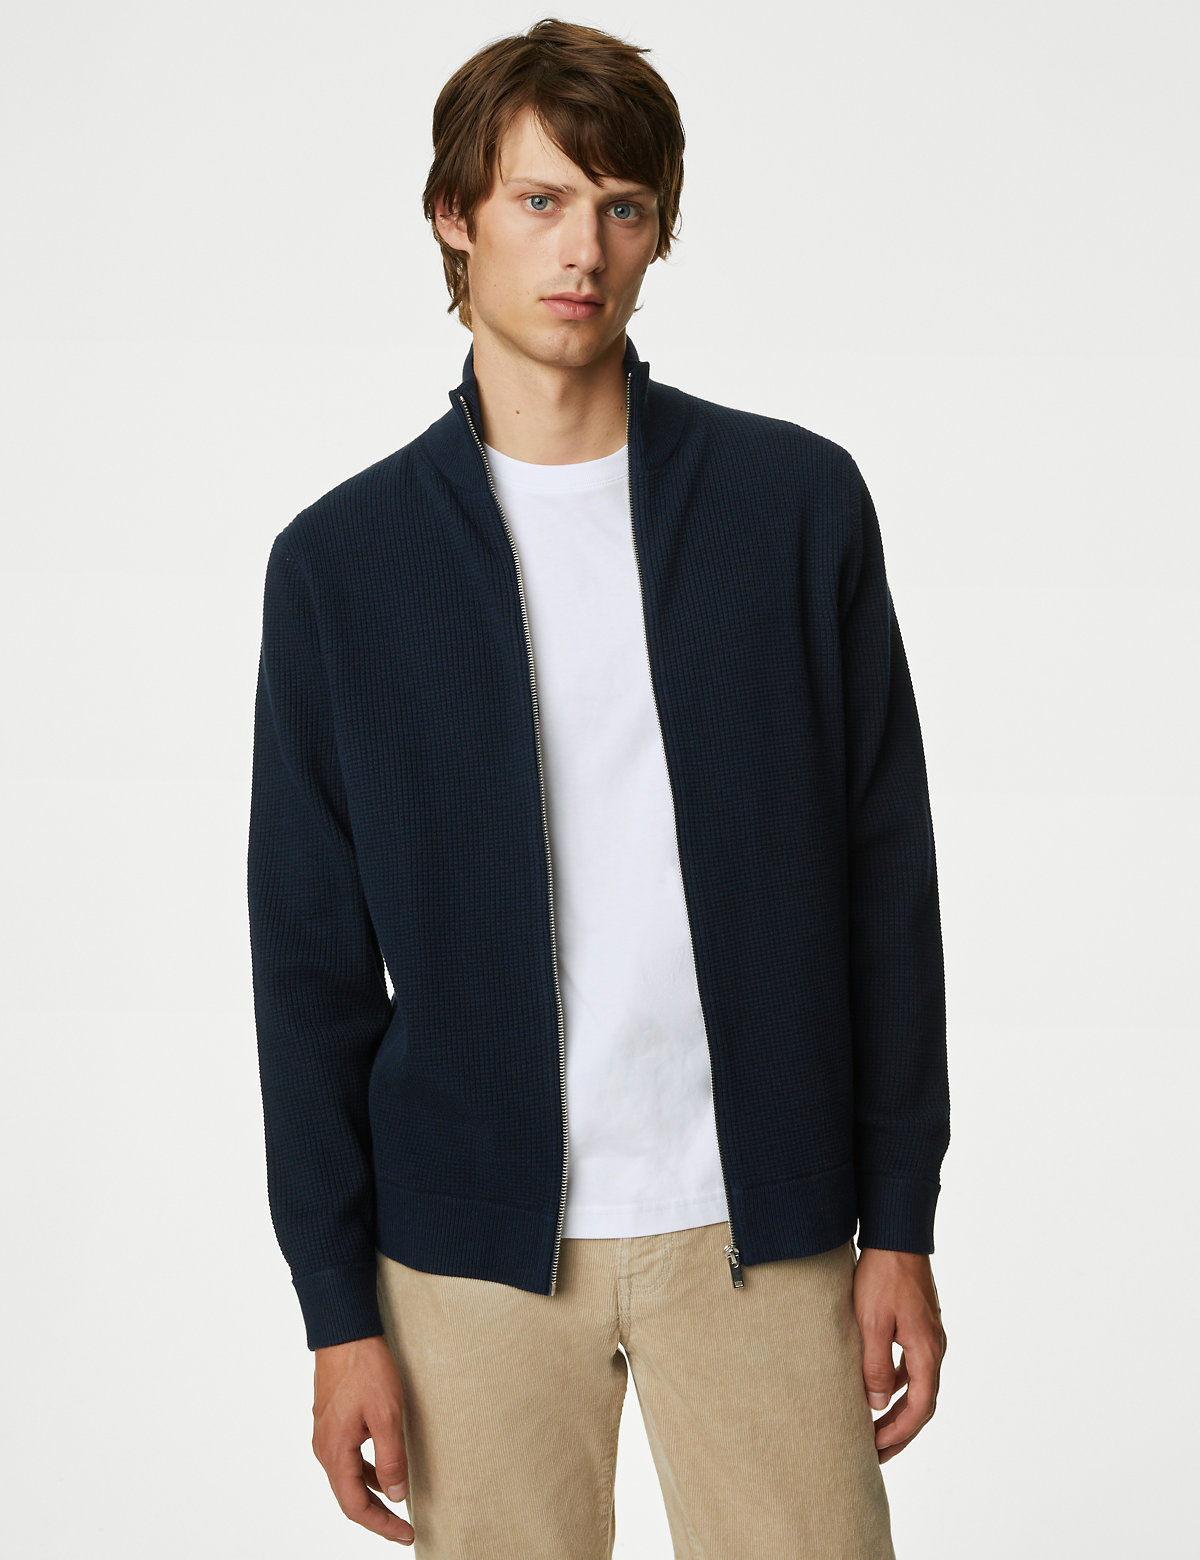 Cotton Blend Zip Up Knitted Jacket